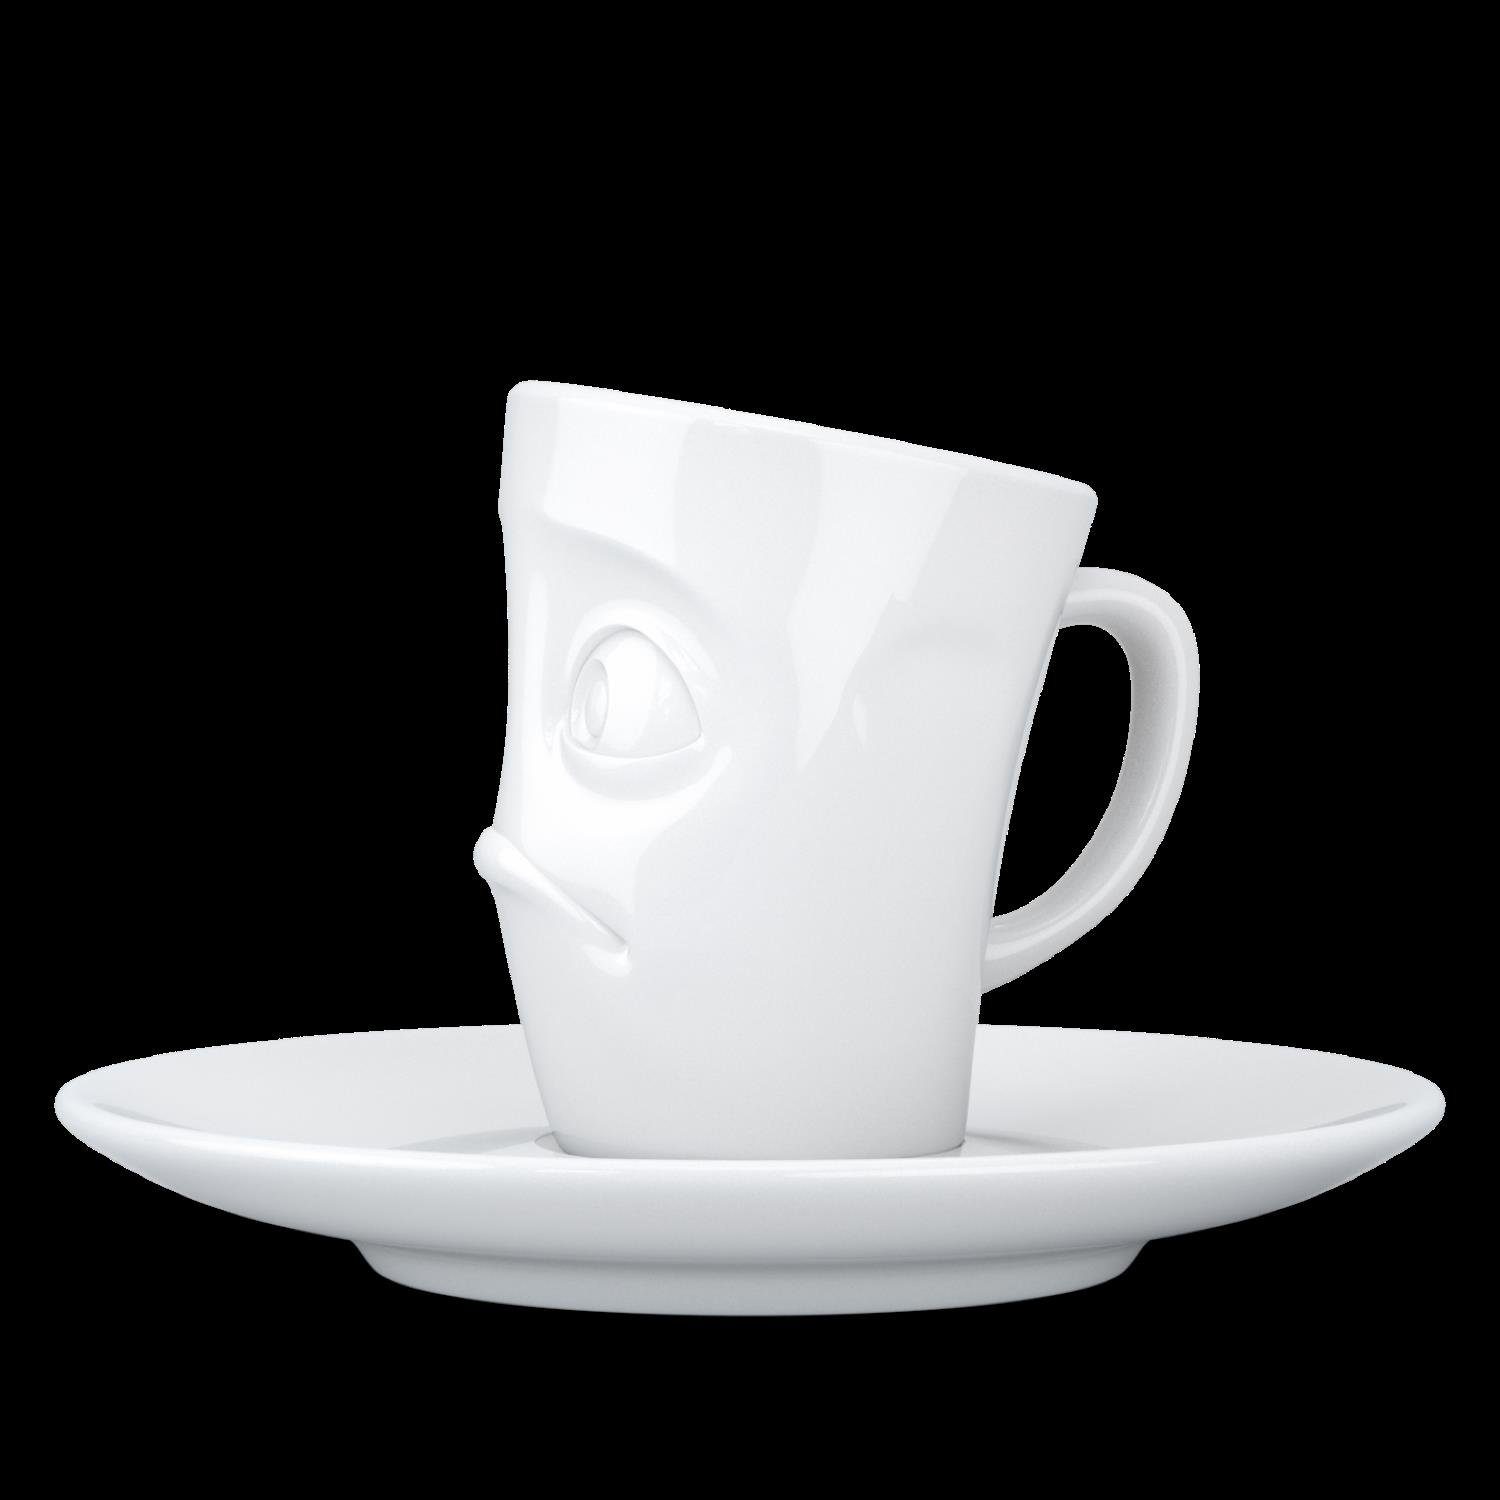 Henkel FIFTYEIGHT Espresso Fiftyeight mit Mug Products PRODUCTS - Tasse